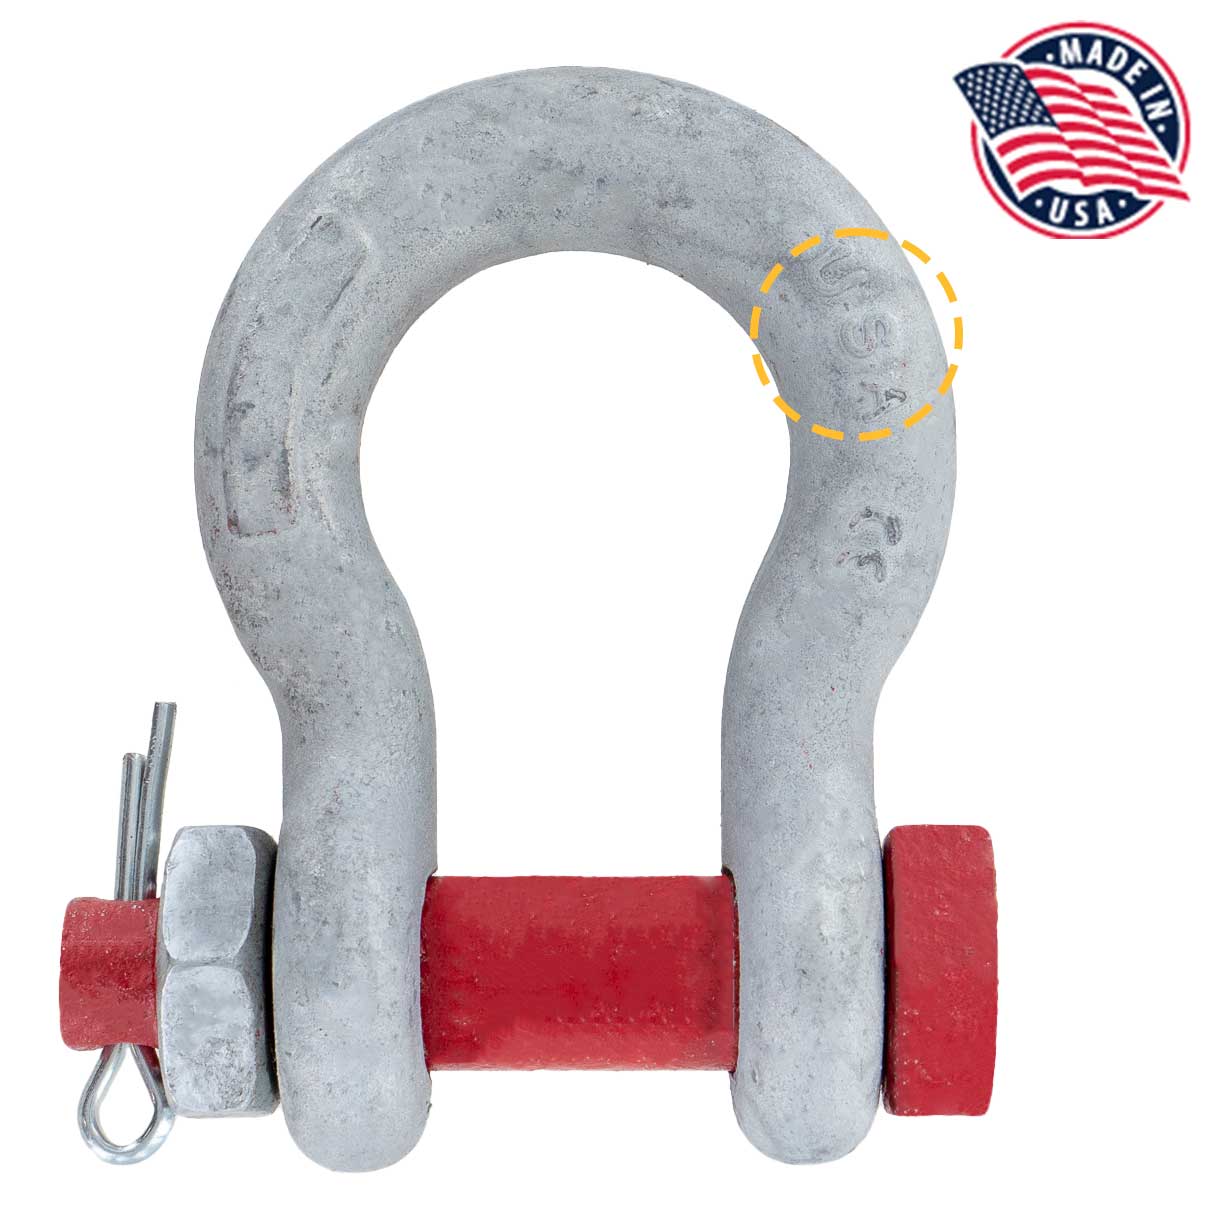 7/16" Crosby® Alloy Bolt Type Anchor Shackle | G-2140 - 2.66 Ton made in USA